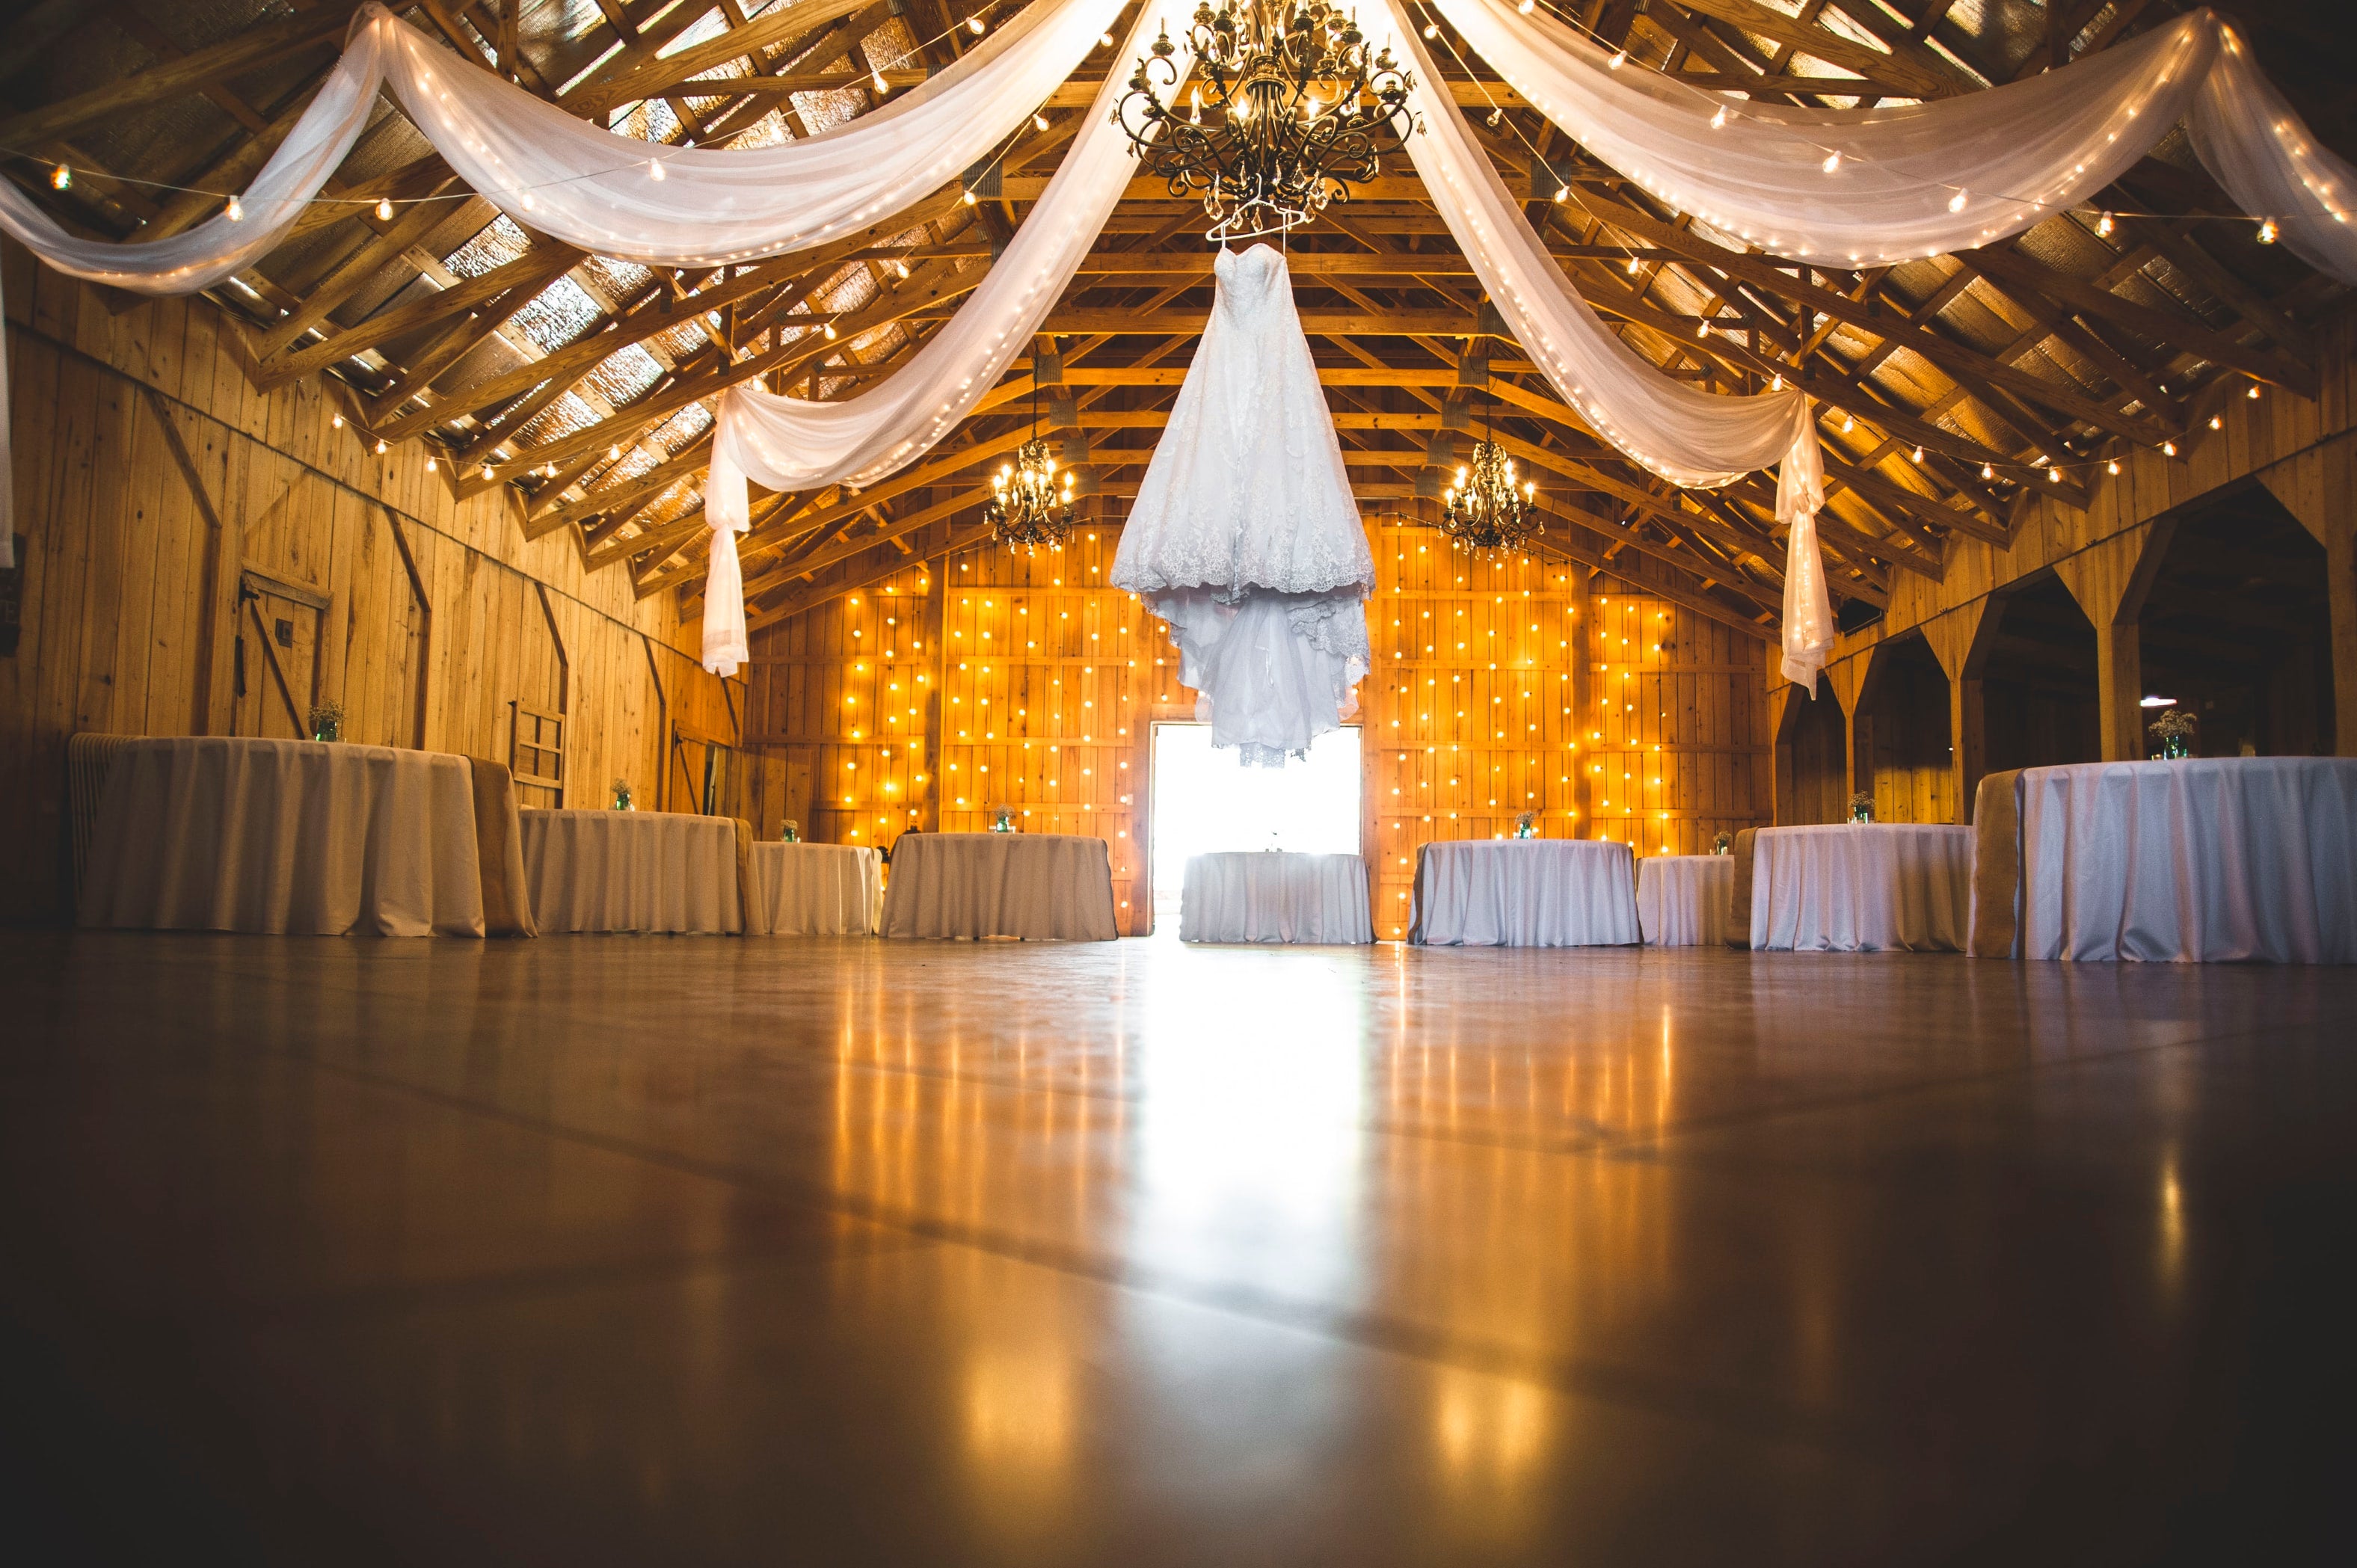 wedding venue with tables and dance floor with tulle hanging from rafters and wedding gown hanging from chandelier